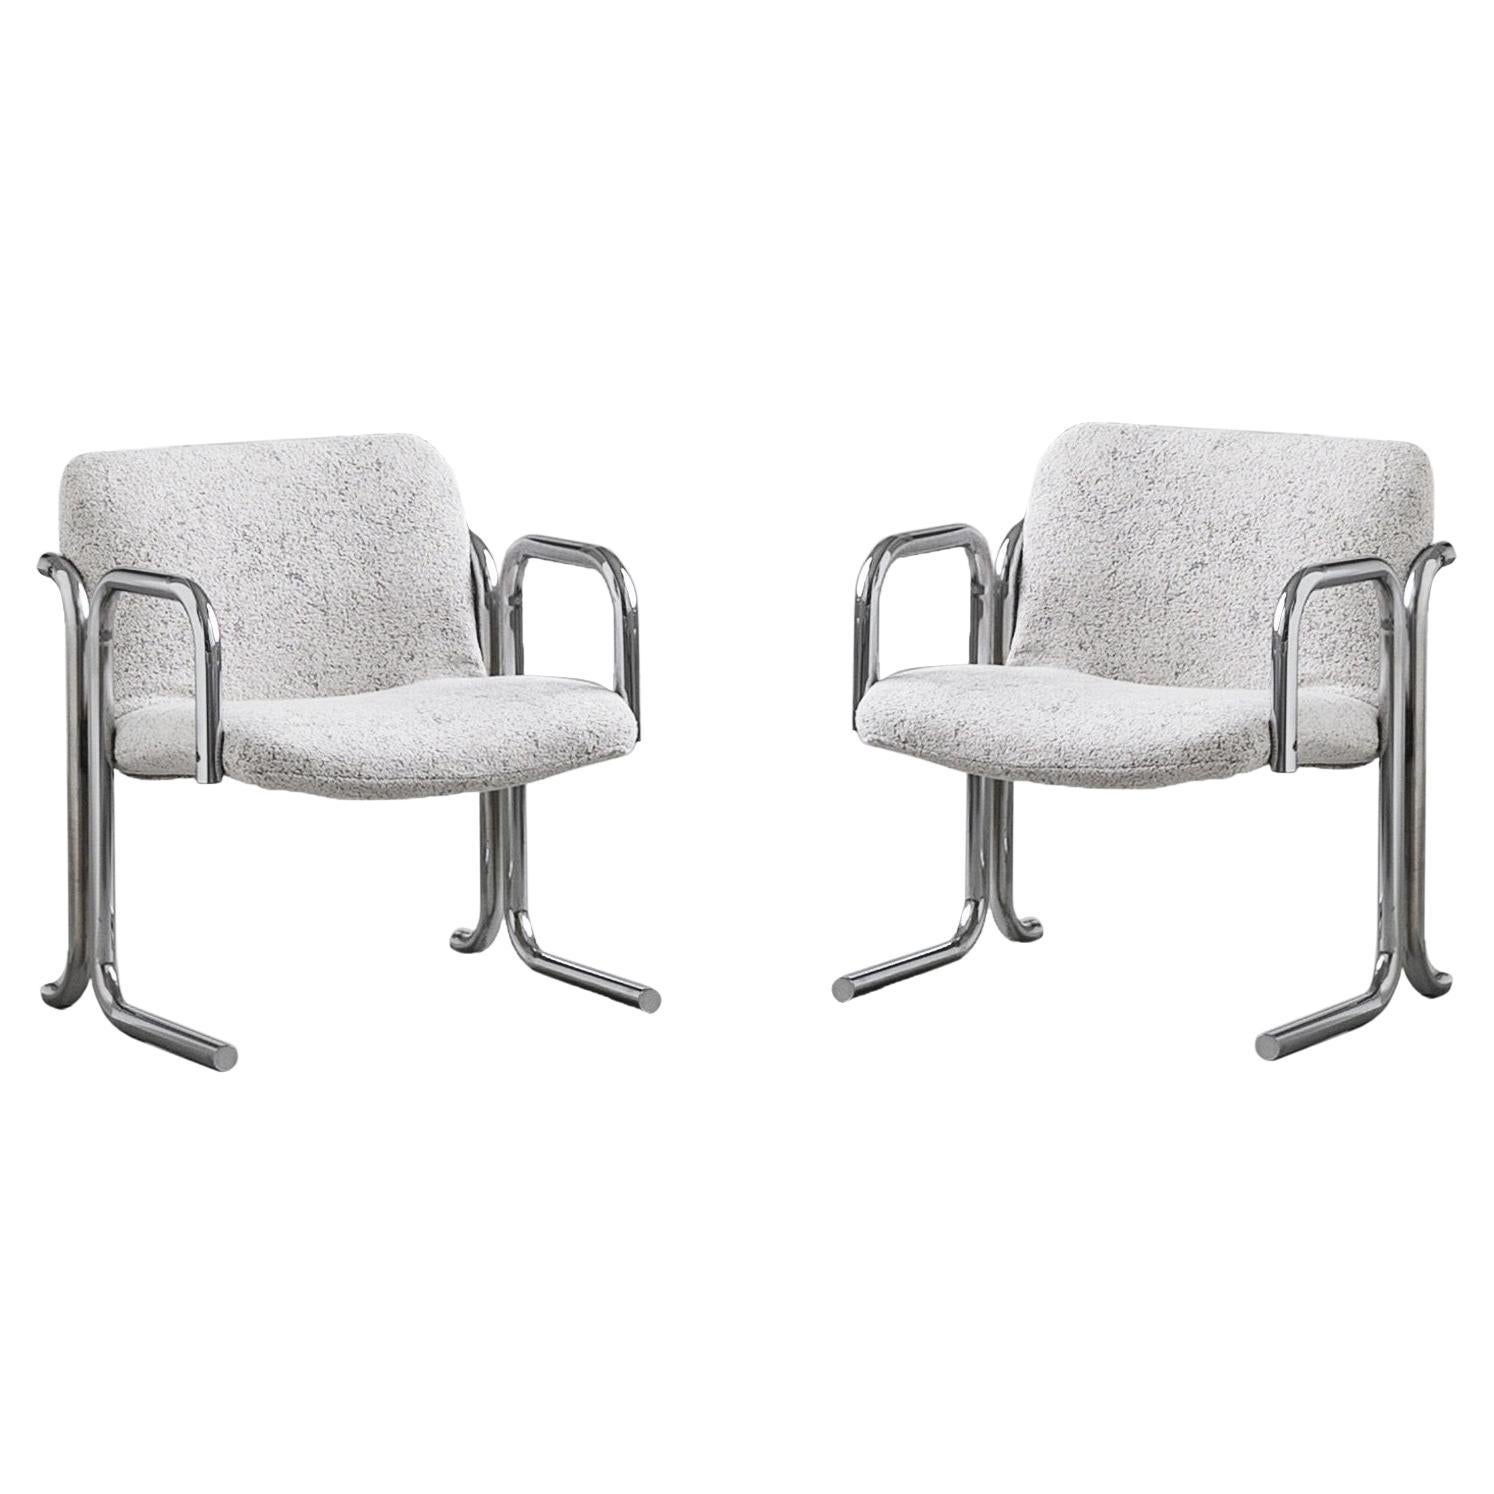 Pair of  vintage "Attica" chairs by Gaetano Croce and Paolo Favaretto for Emmegi